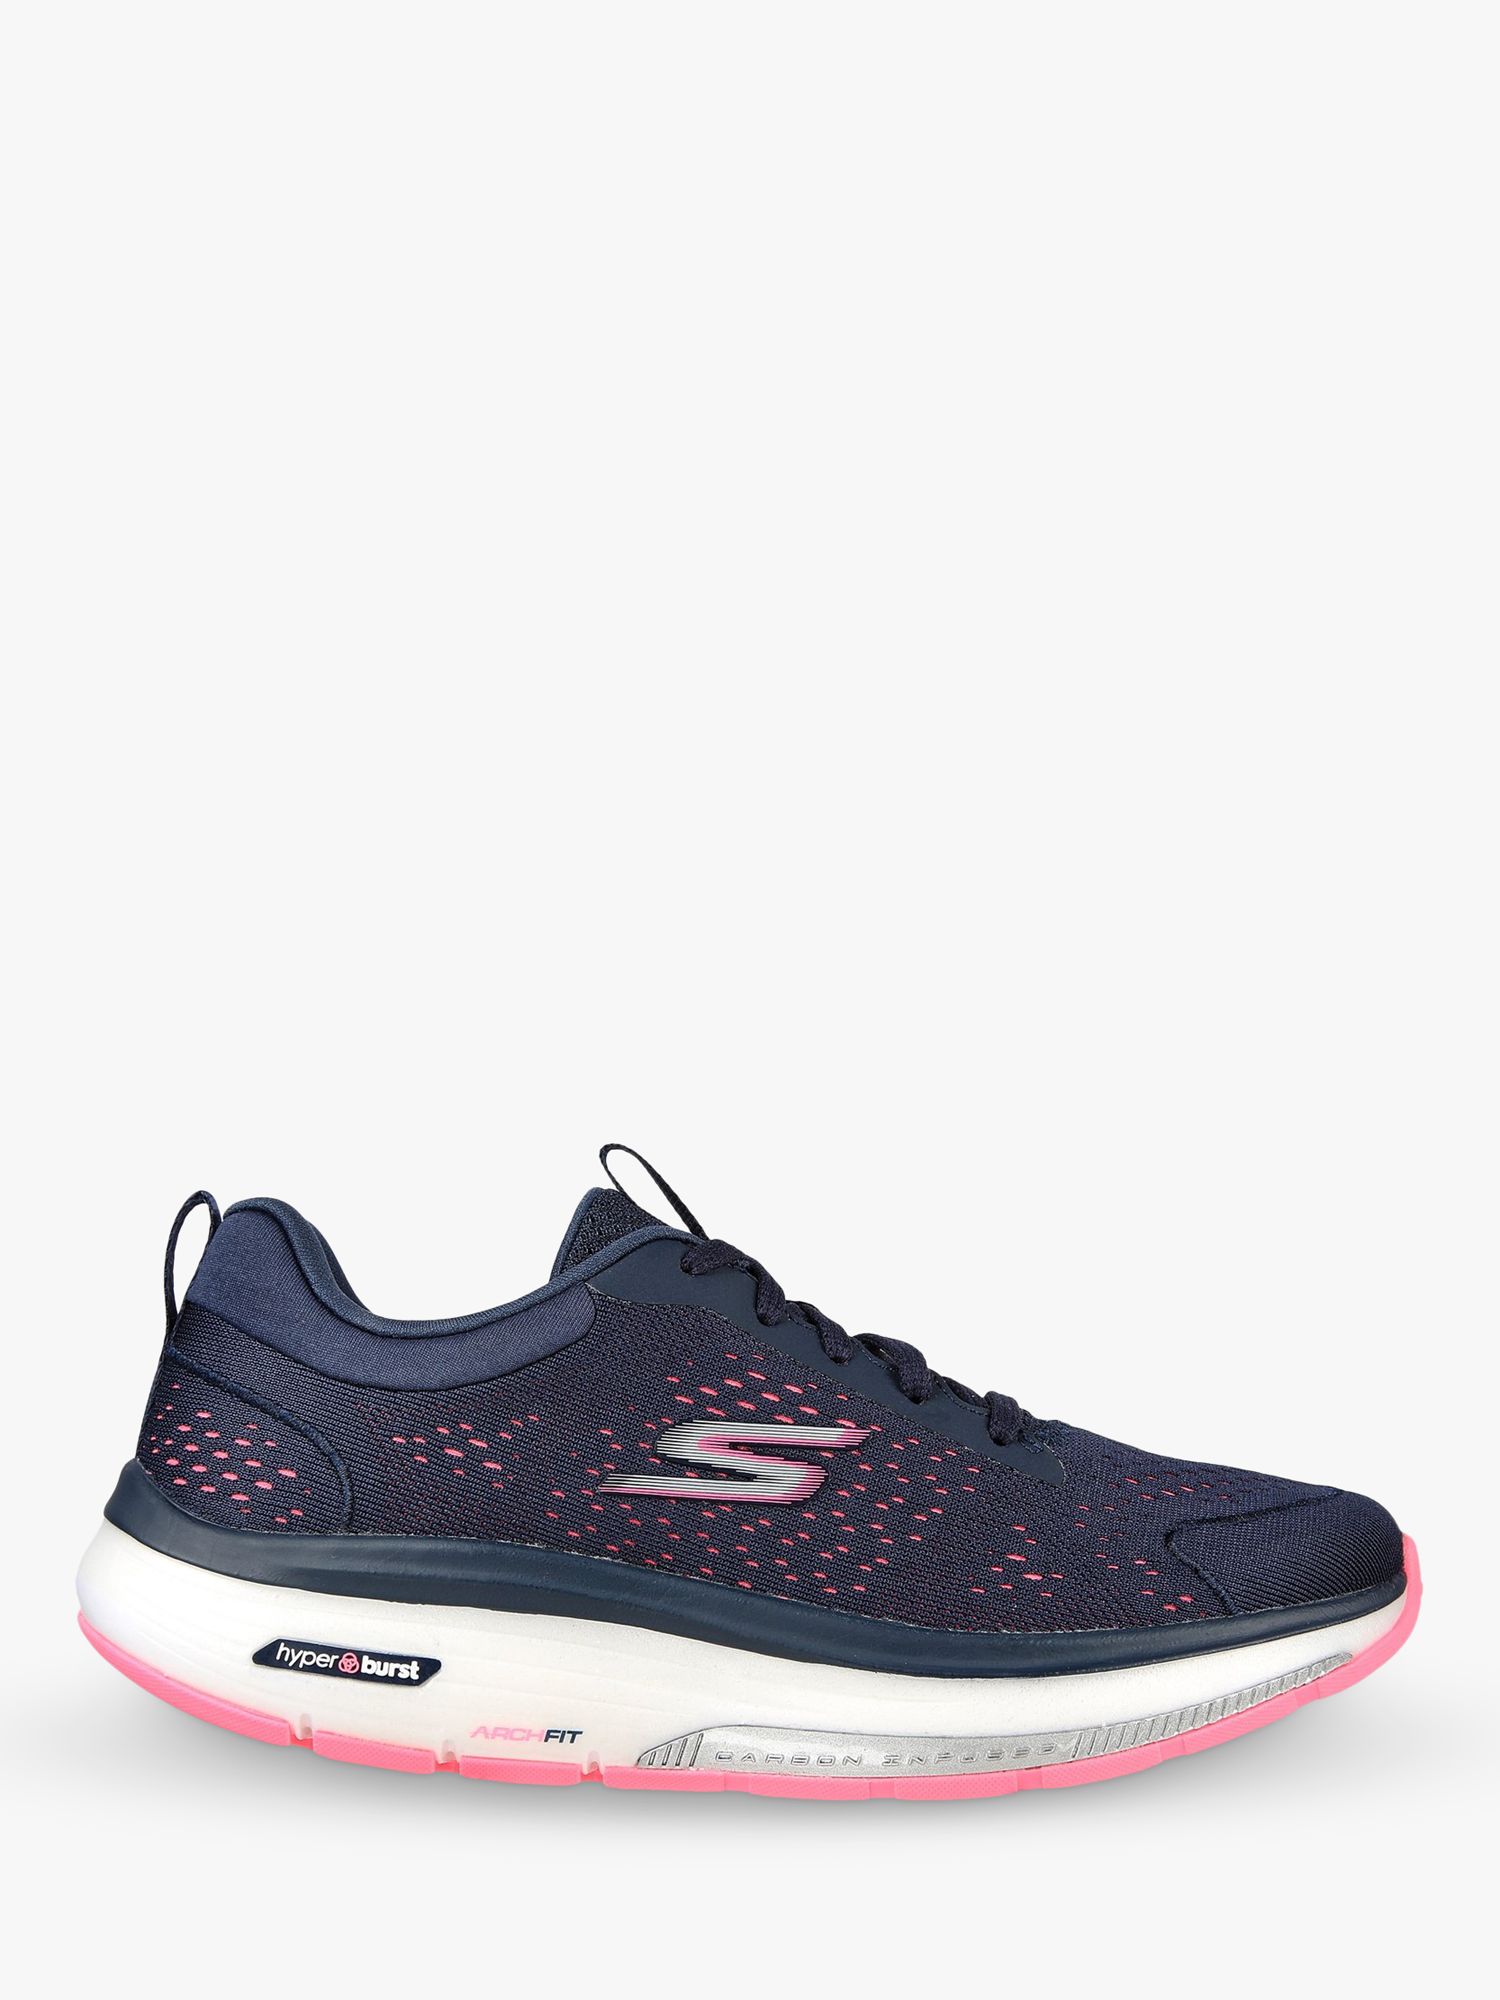 Skechers Go Walk Arch Fit Walker Trainers, Navy/Hot Pink at Lewis & Partners